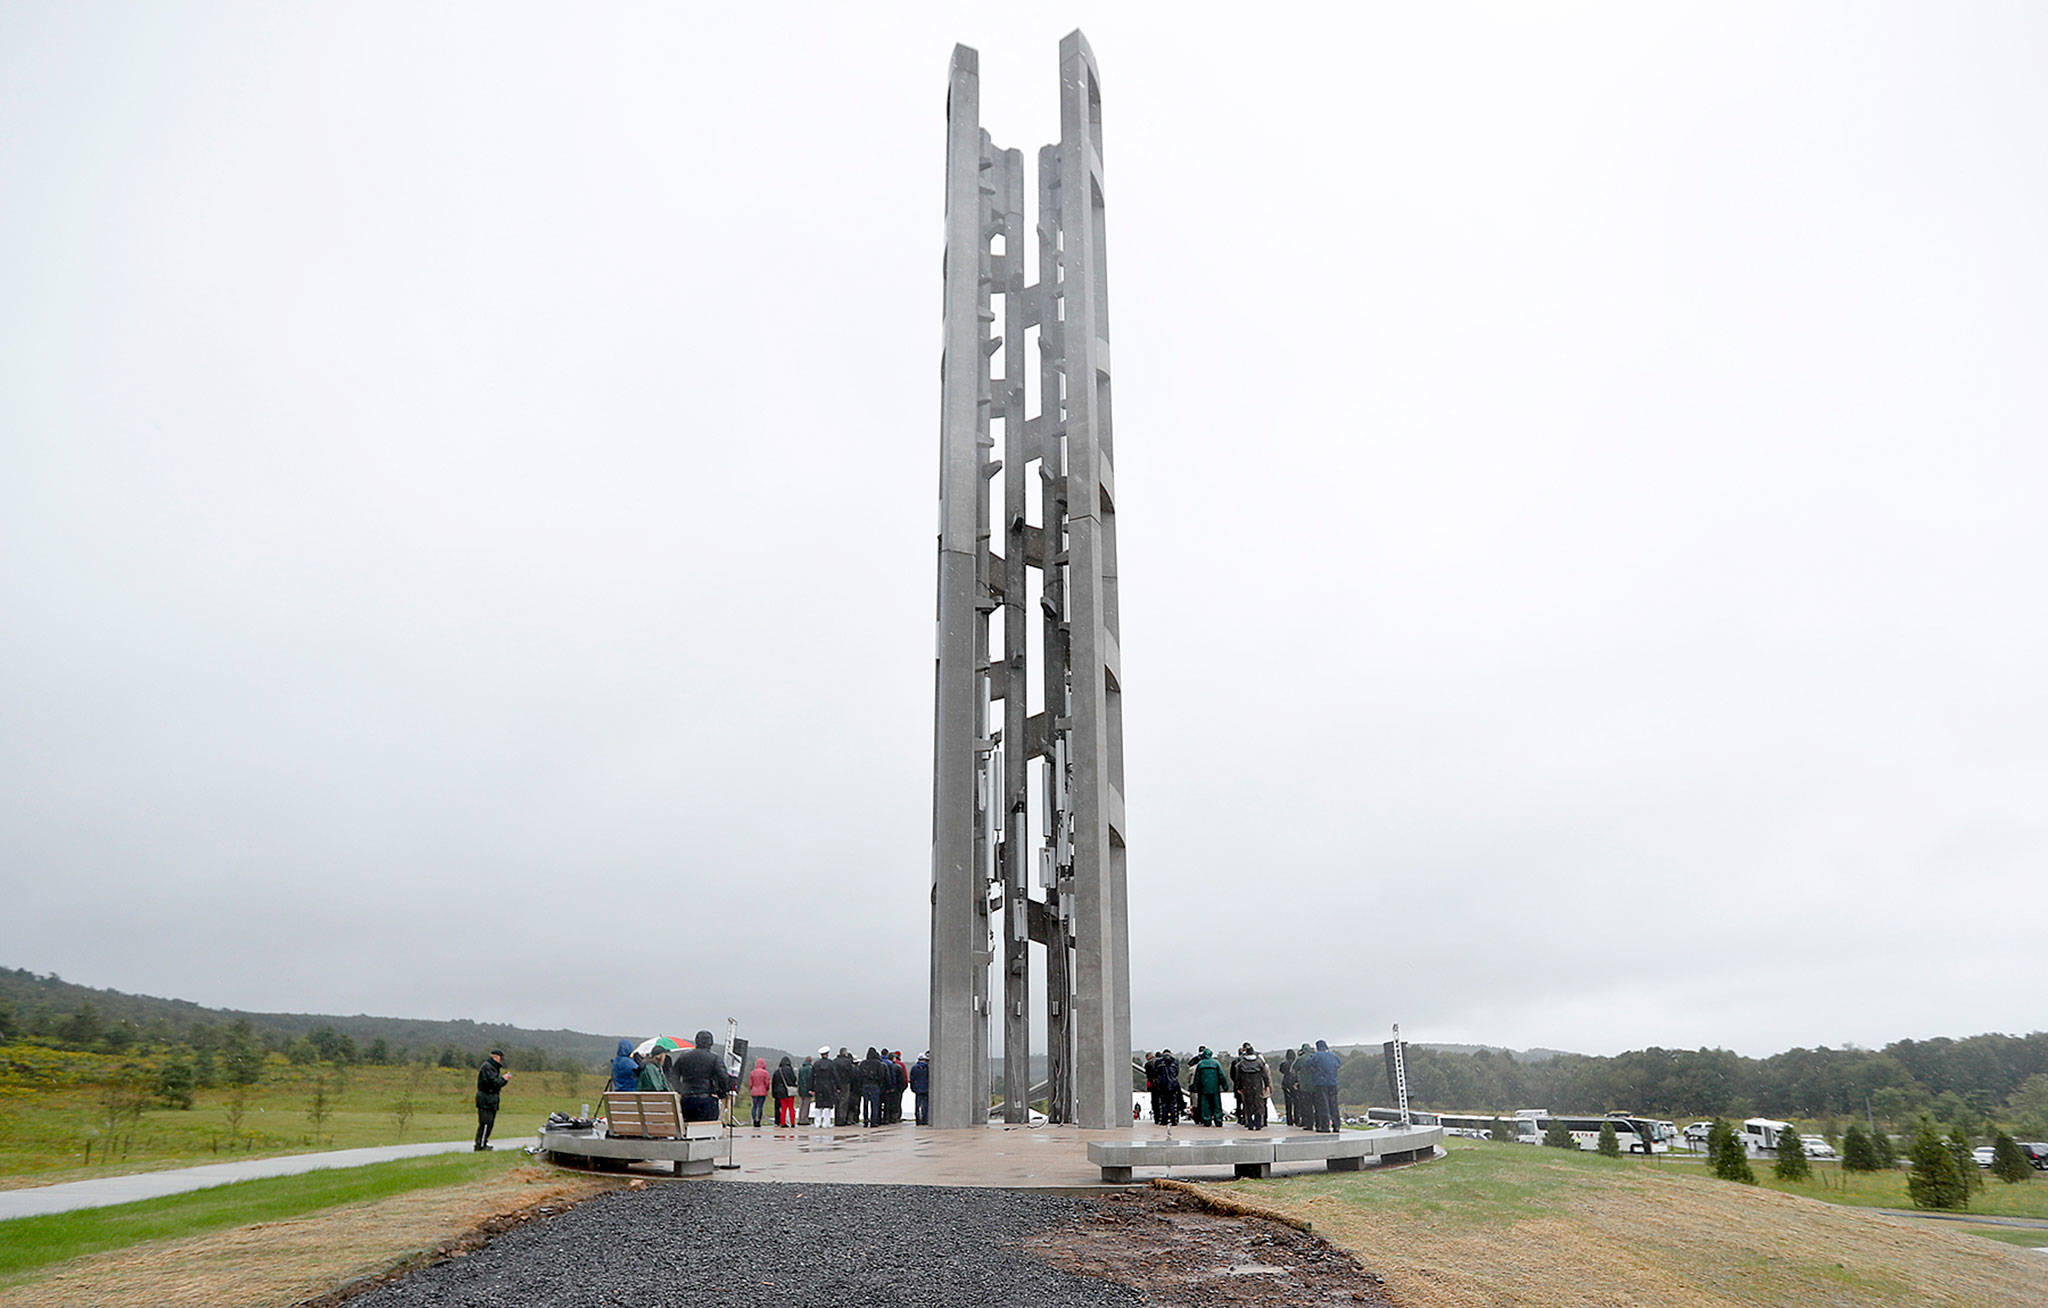 People attending the dedication stand around the 93-foot tall Tower of Voices on Sunday at the Flight 93 National Memorial in Shanksville, Pennsylvania. The tower contains 40 wind chimes representing the 40 people that perished in the crash of Flight 93 in the terrorist attacks of Sept. 11, 2001. (AP Photo/Keith Srakocic, Pool)